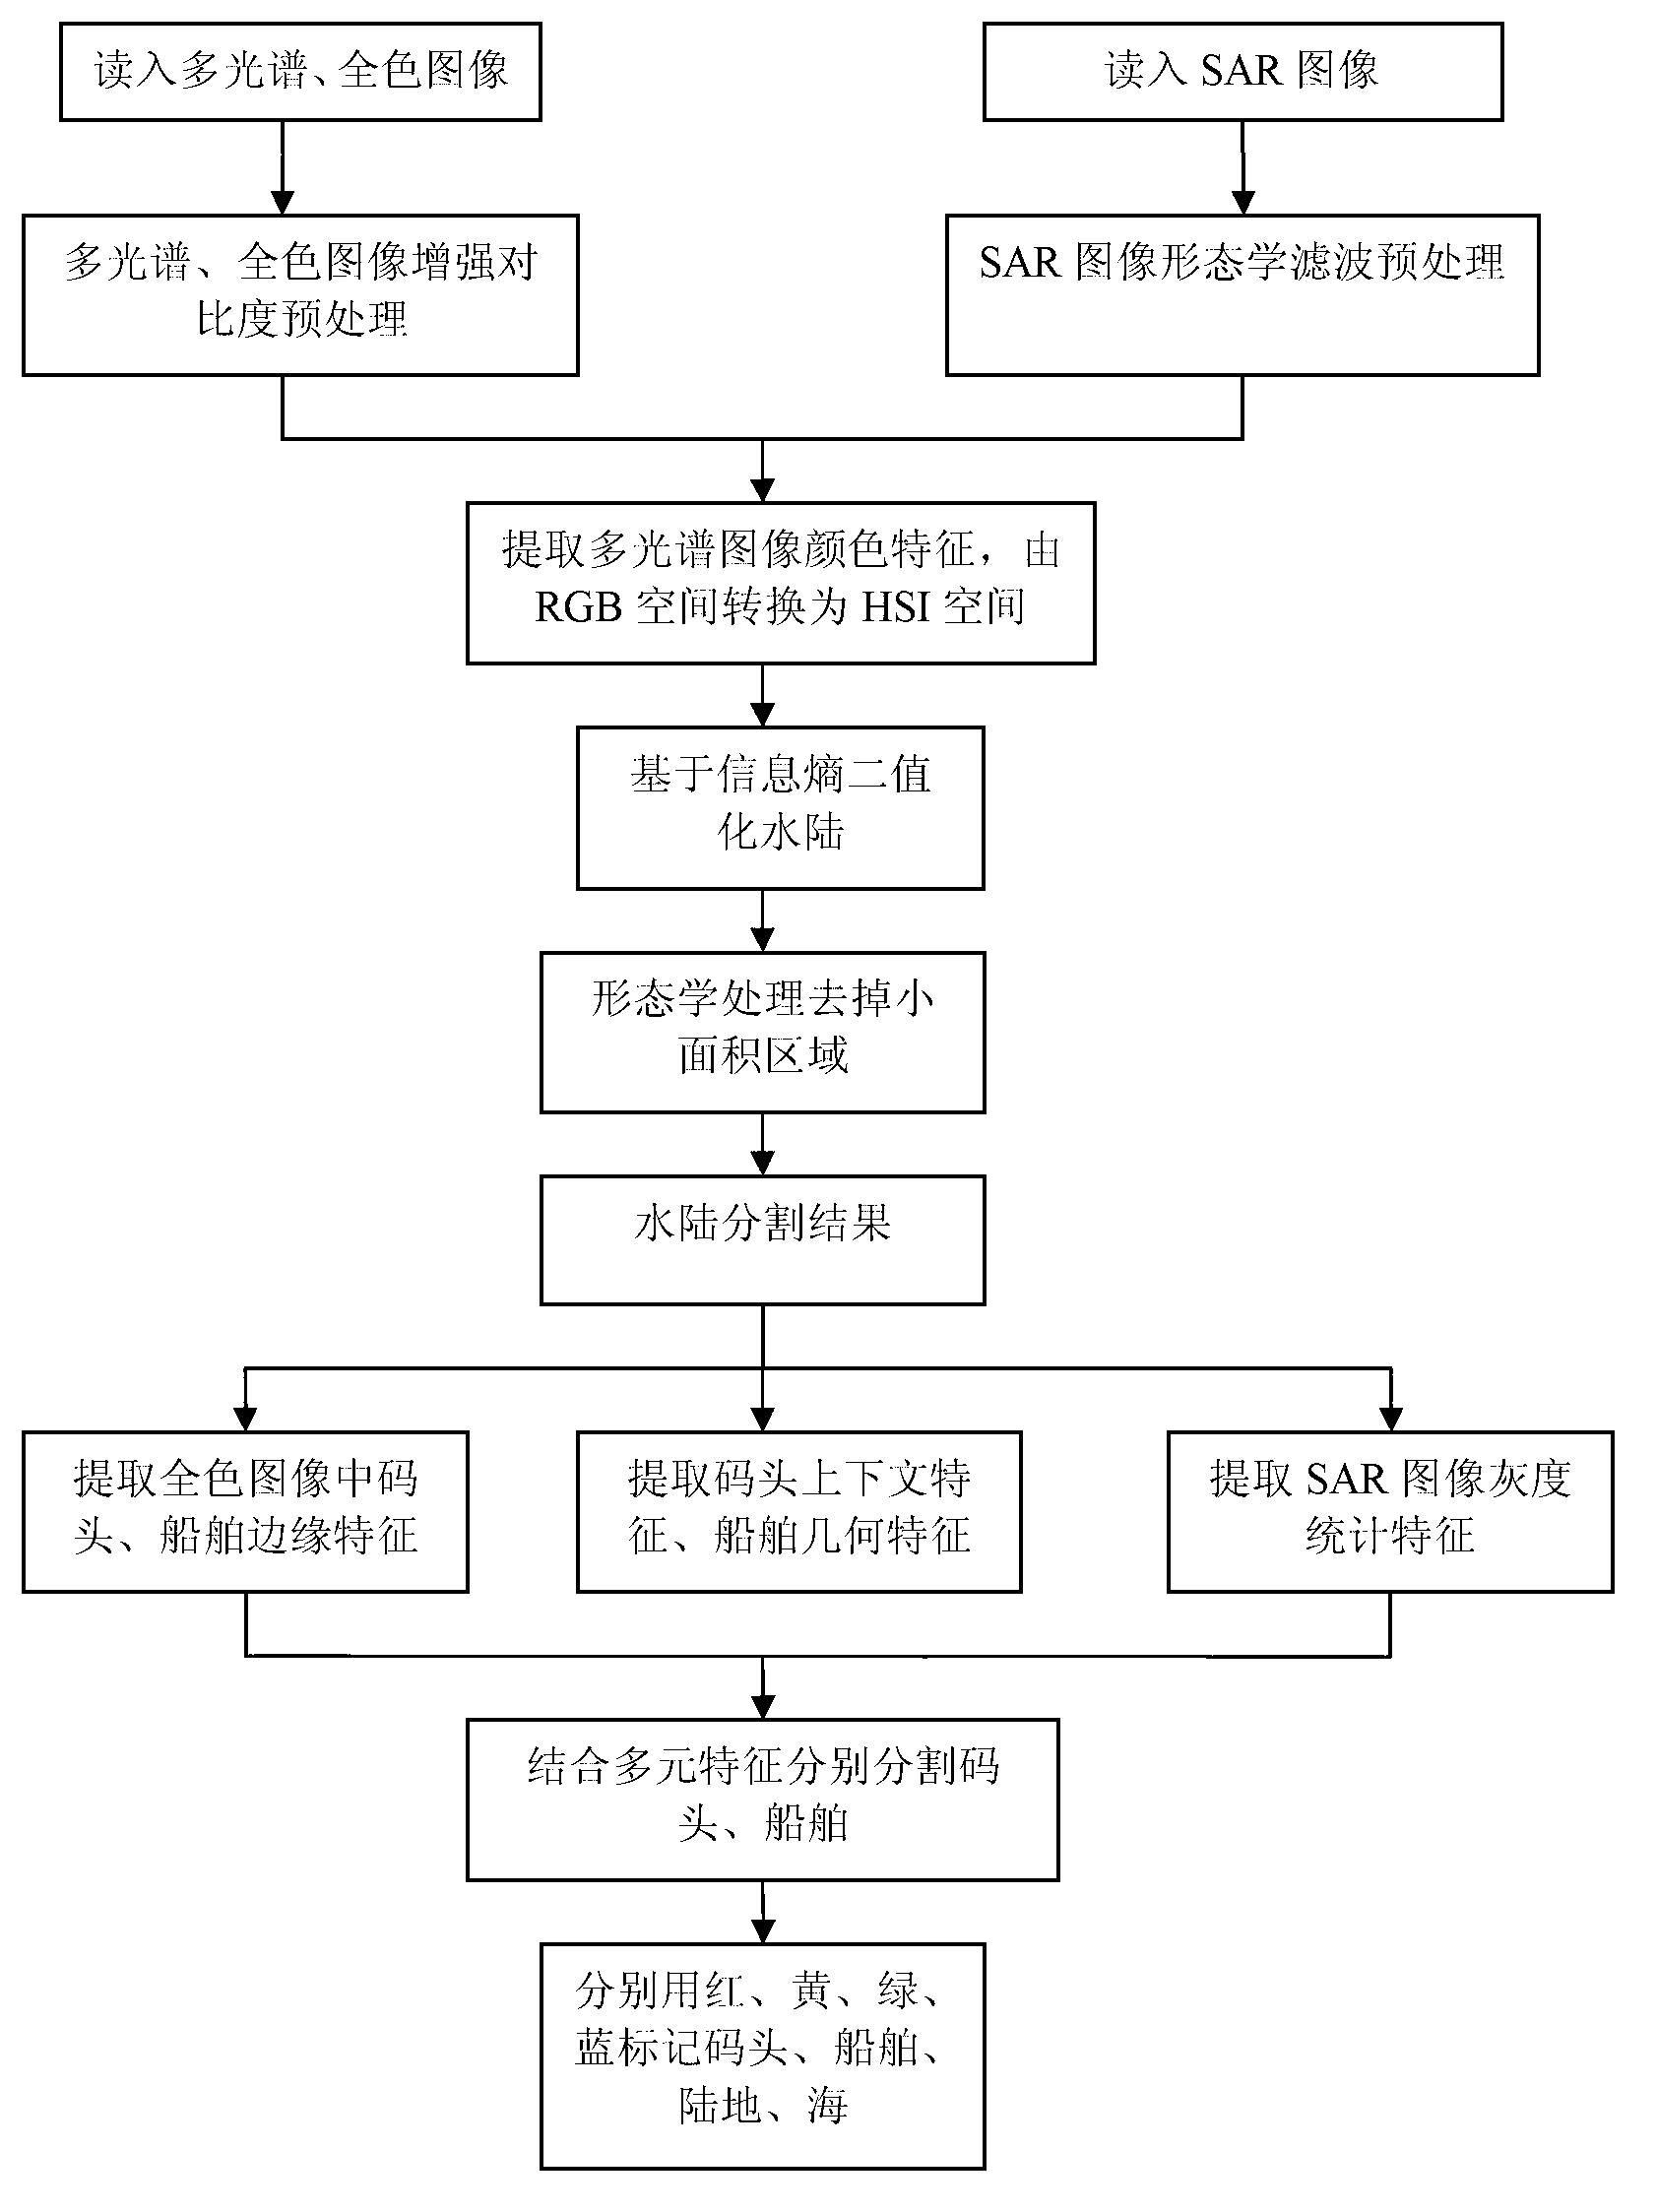 Multisource remote sensing image characteristic combined wharf and ship partition method